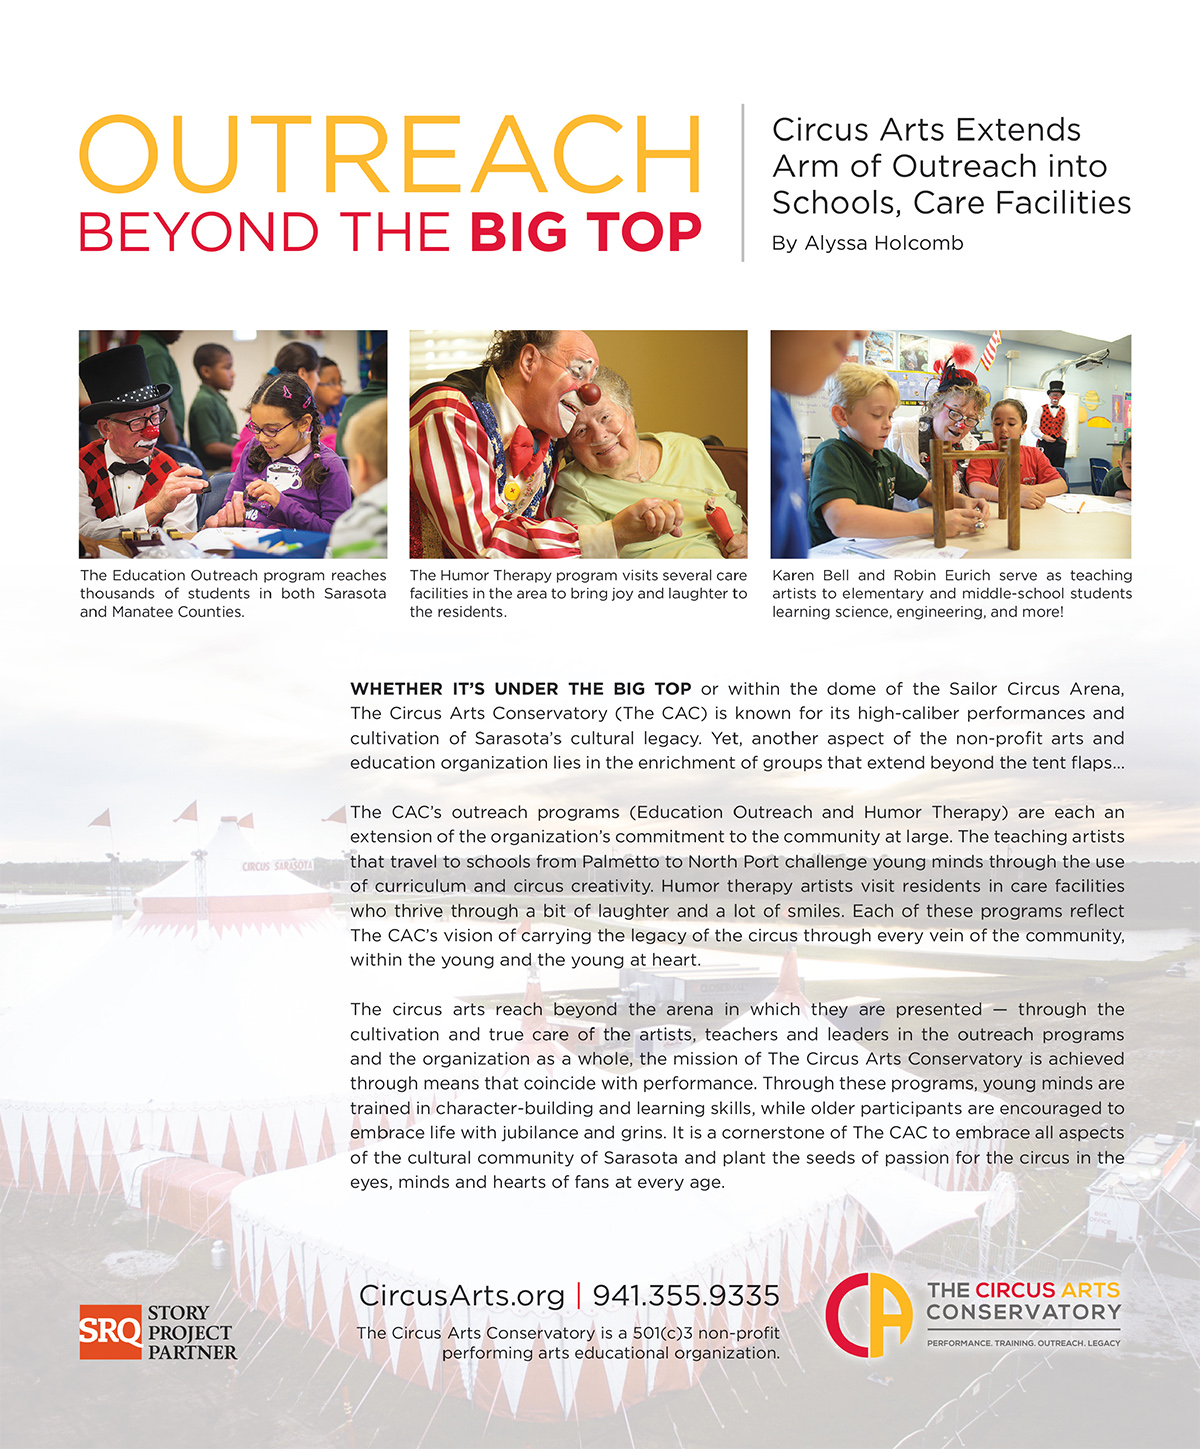 Outreach Beyond the Big Top